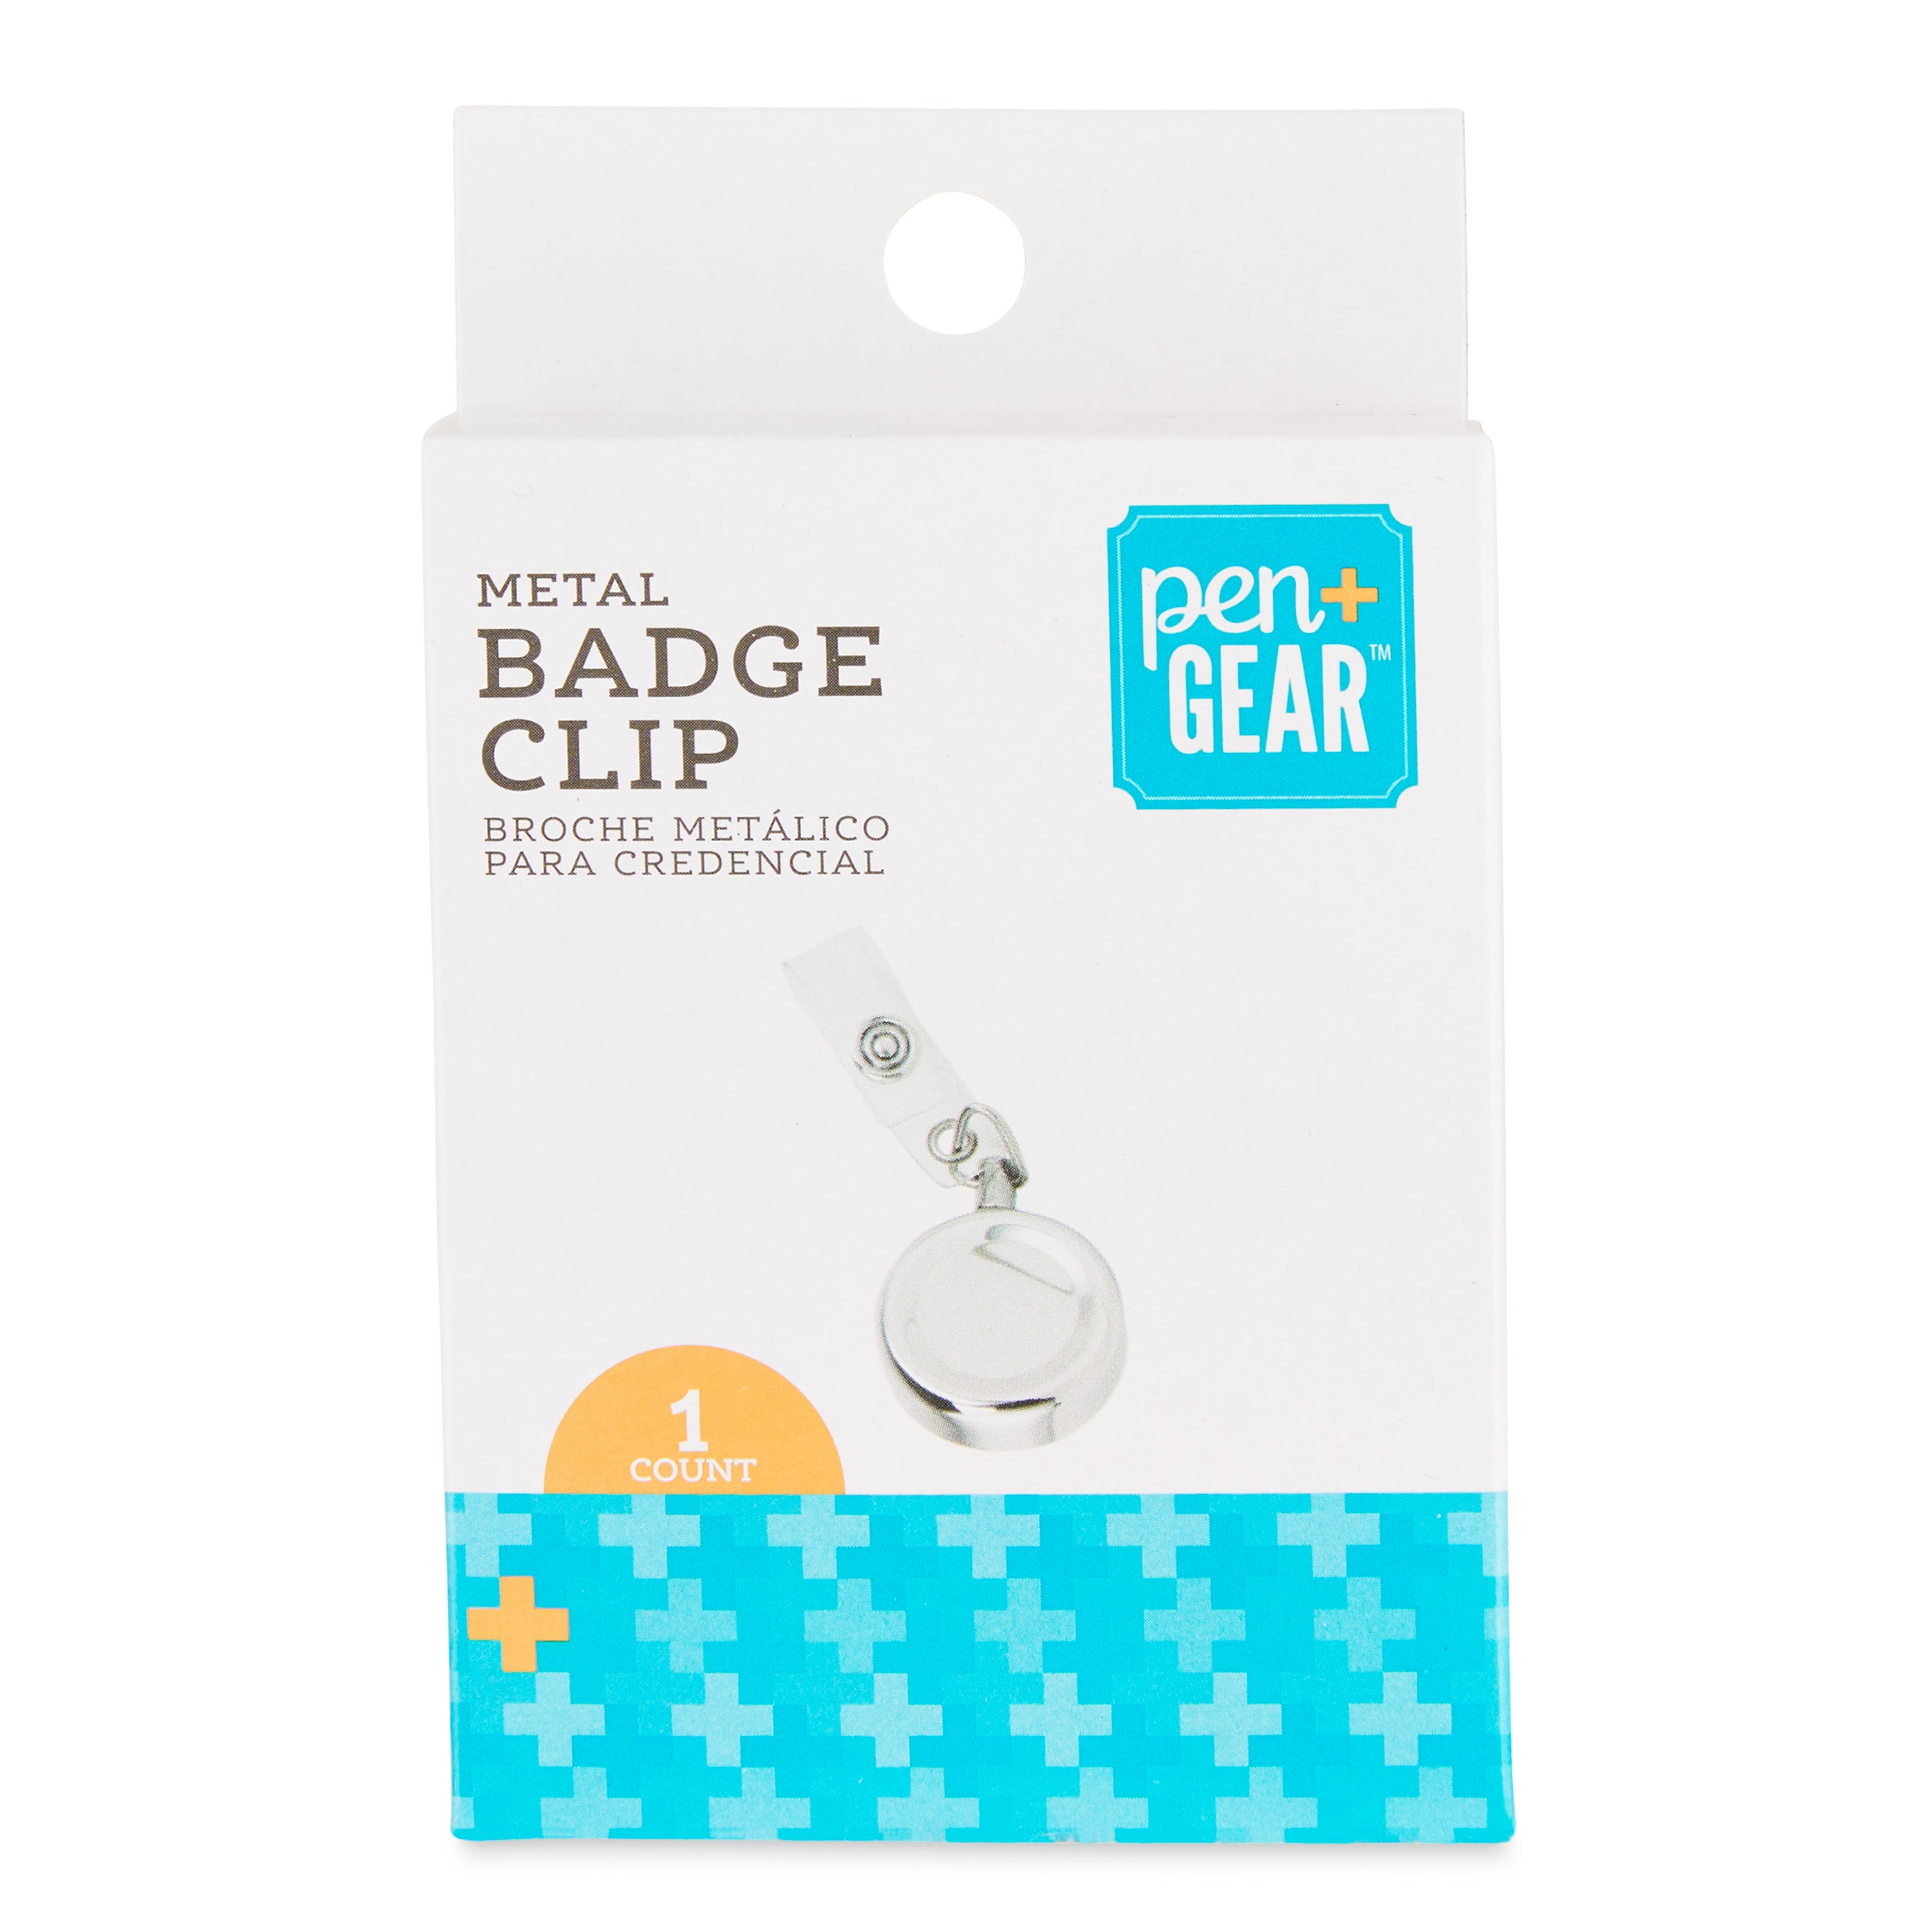 Pen+Gear Metal Badge Clip for Badge Cards, Silver, 1 Ct